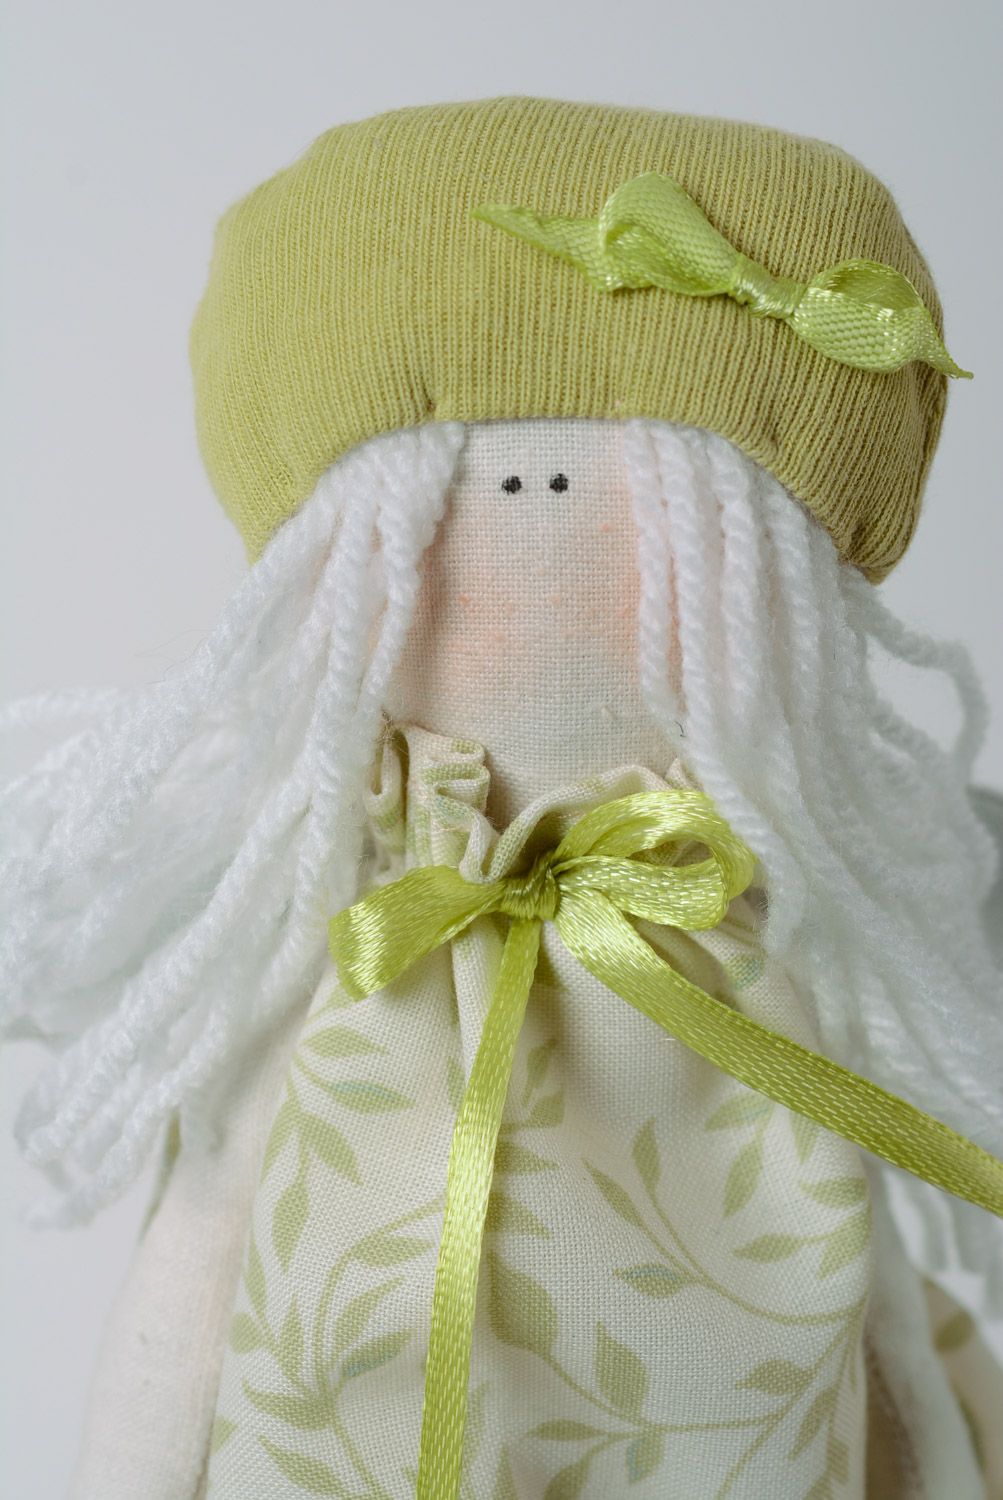 Handmade soft toy sewn of cotton in the shape of angel in light color palette photo 2